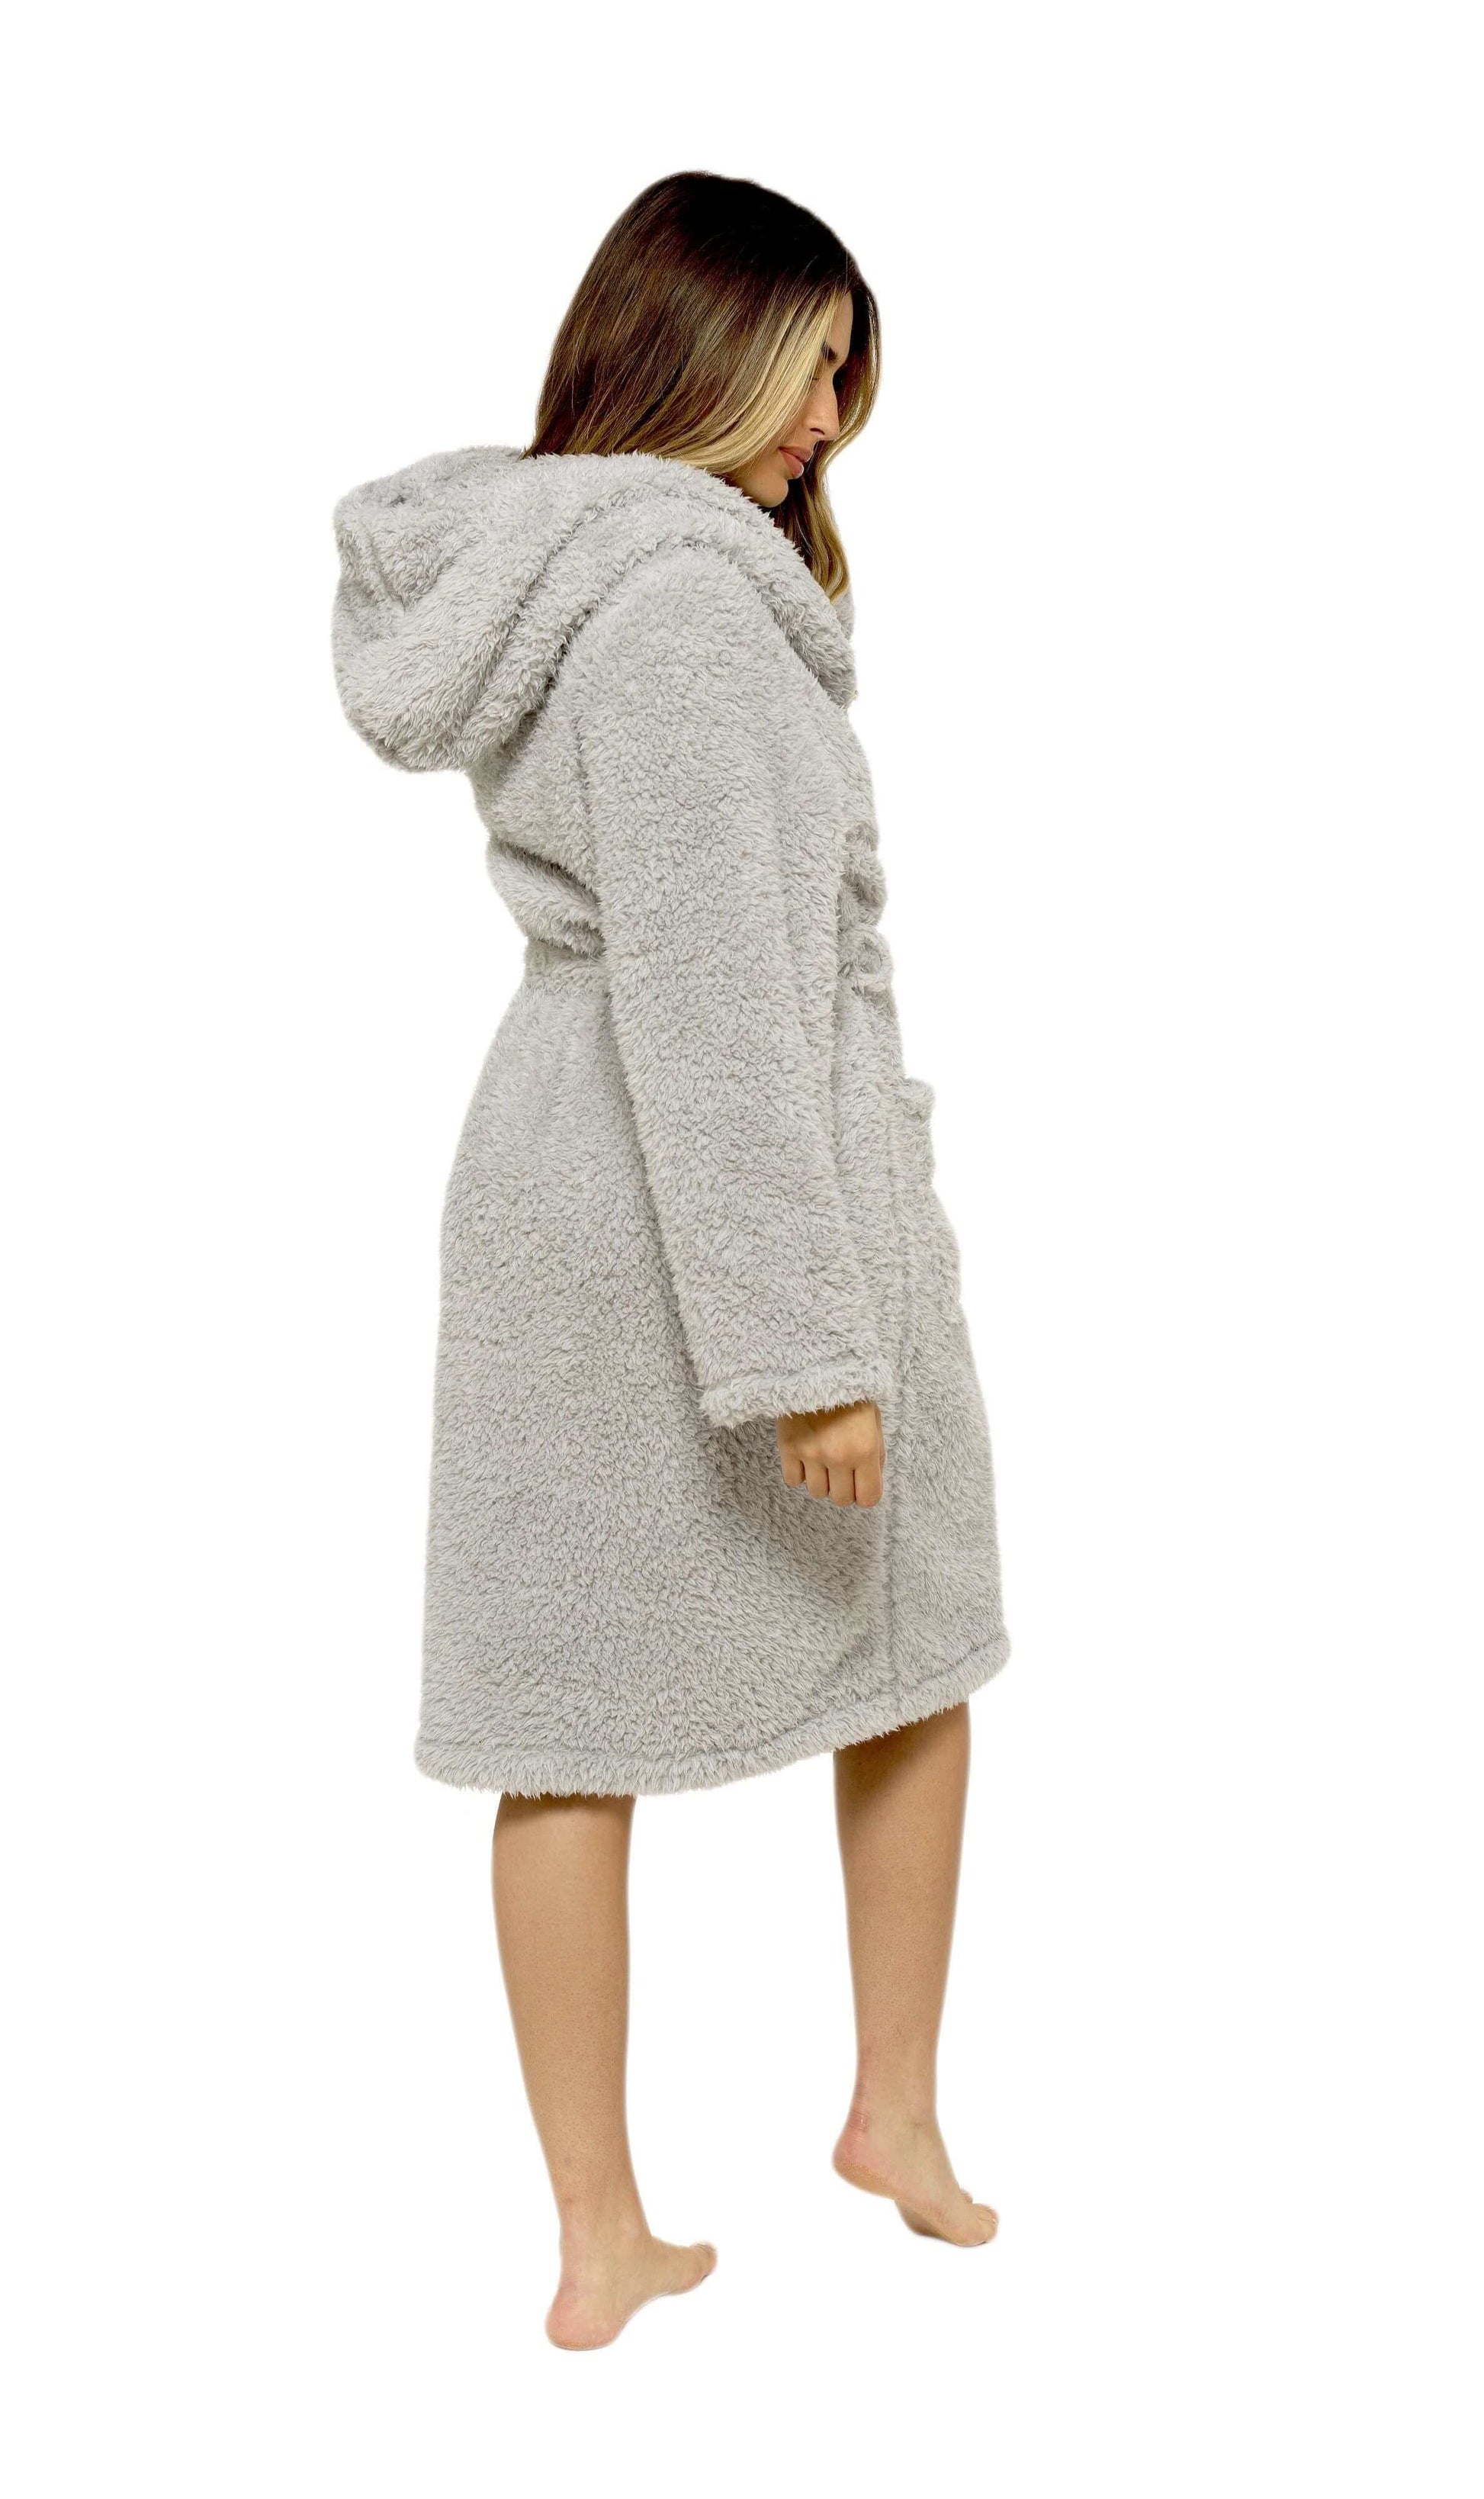 Women's Soft Grey Teddy Fleece Hooded Robe Dressing Gown, Ladies Bath Robe Loungewear. Buy now for £20.00. A Robe by Daisy Dreamer. 12-14, 16-18, 20-22, 8-10, bridesmaid, charcoal, daisy dreamer, dressing gown, fleece, grey, gym, hooded robe, hotel, ladie